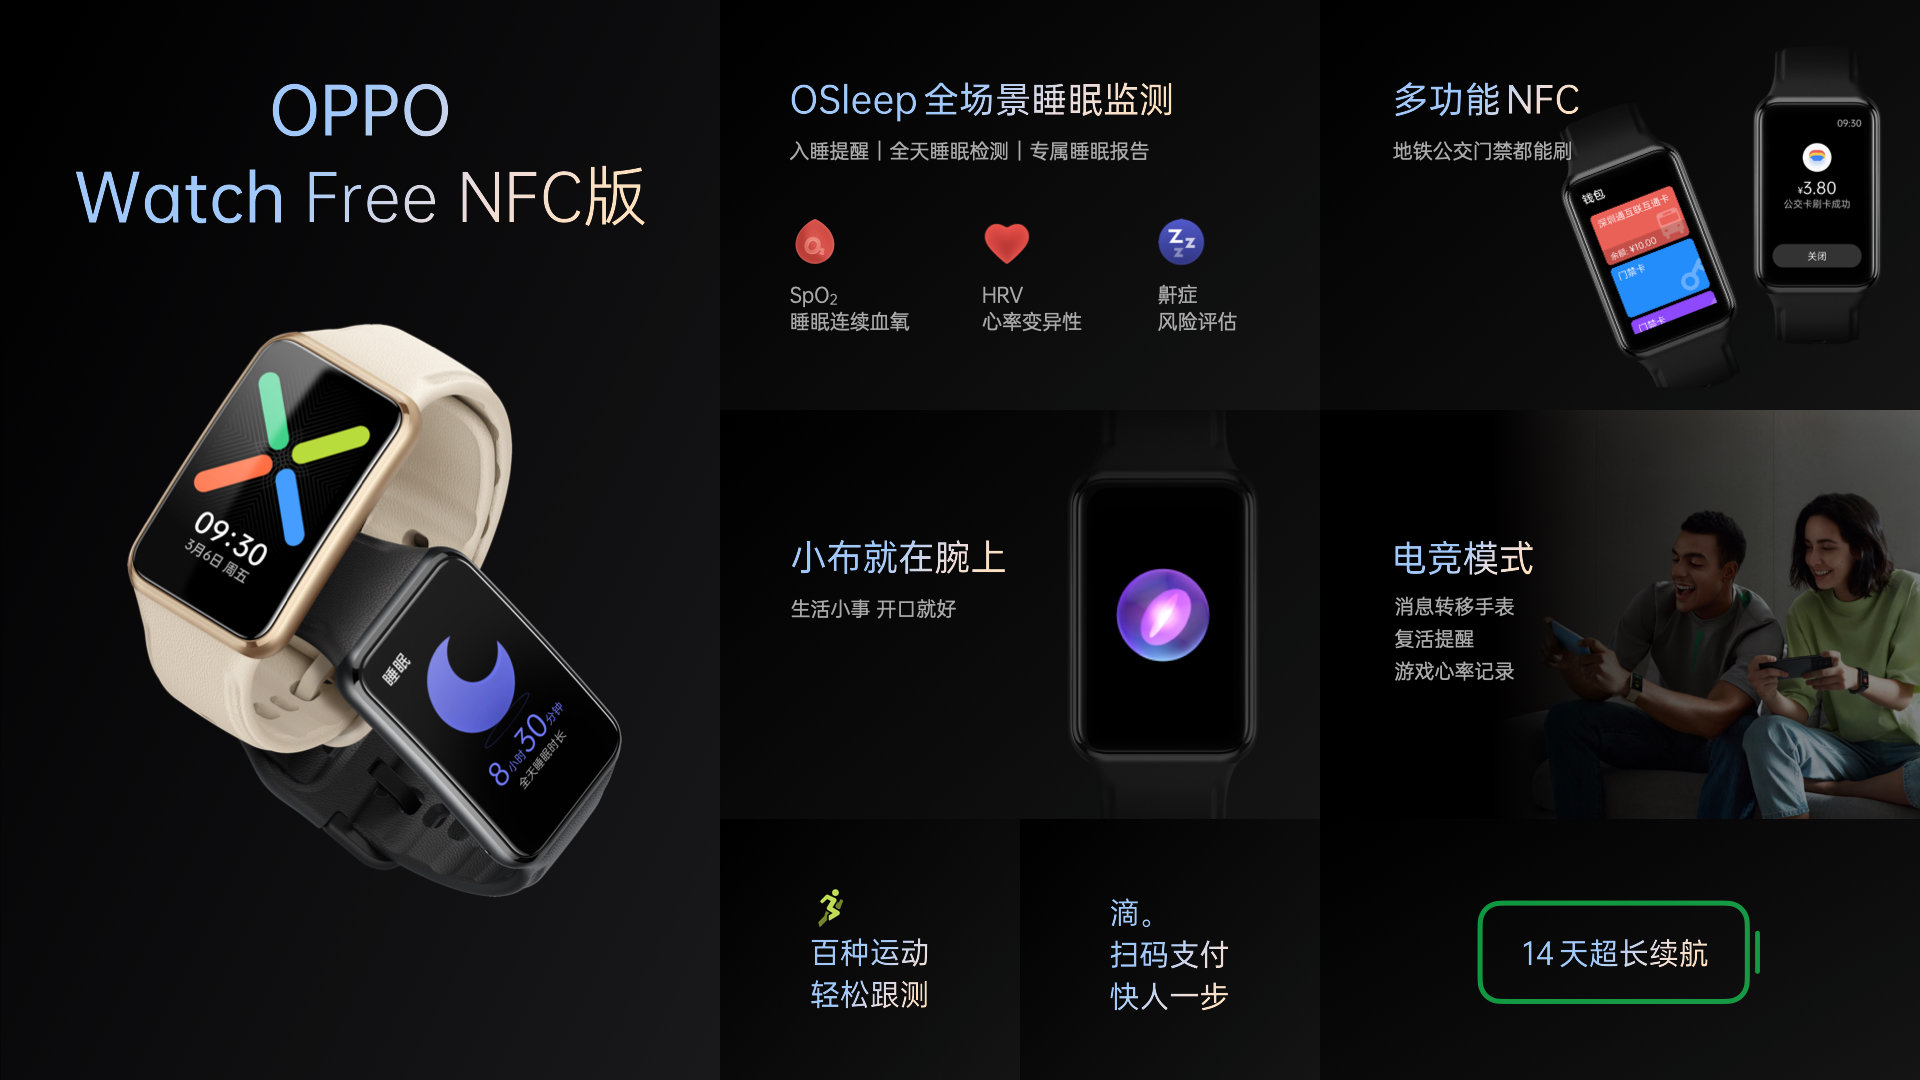 OPPO Watch Free NFC